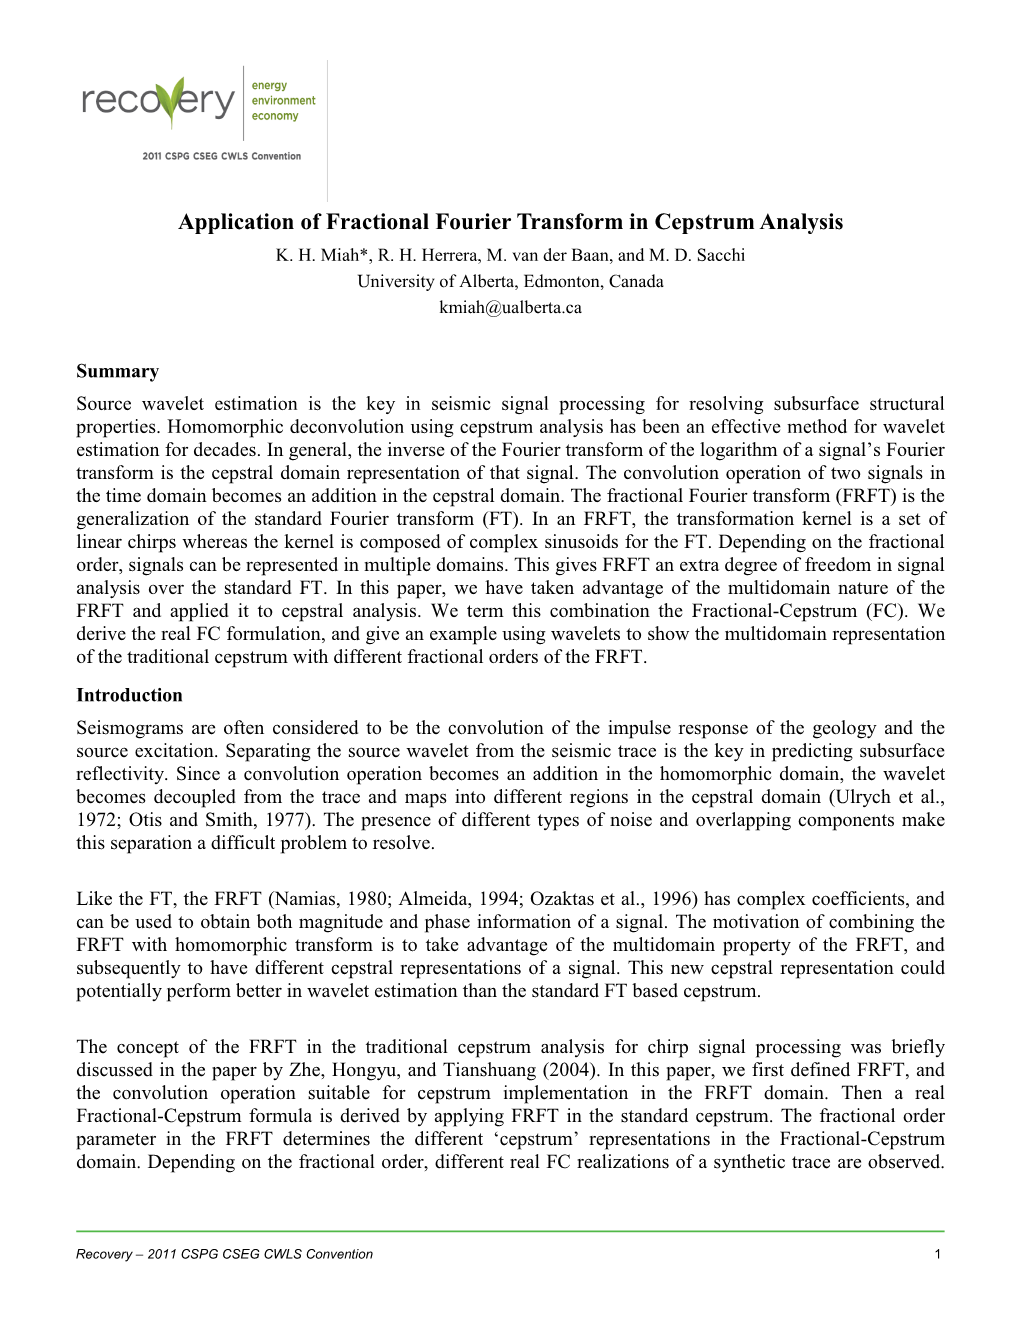 Application of Fractional Fourier Transform in Cepstrum Analysis K